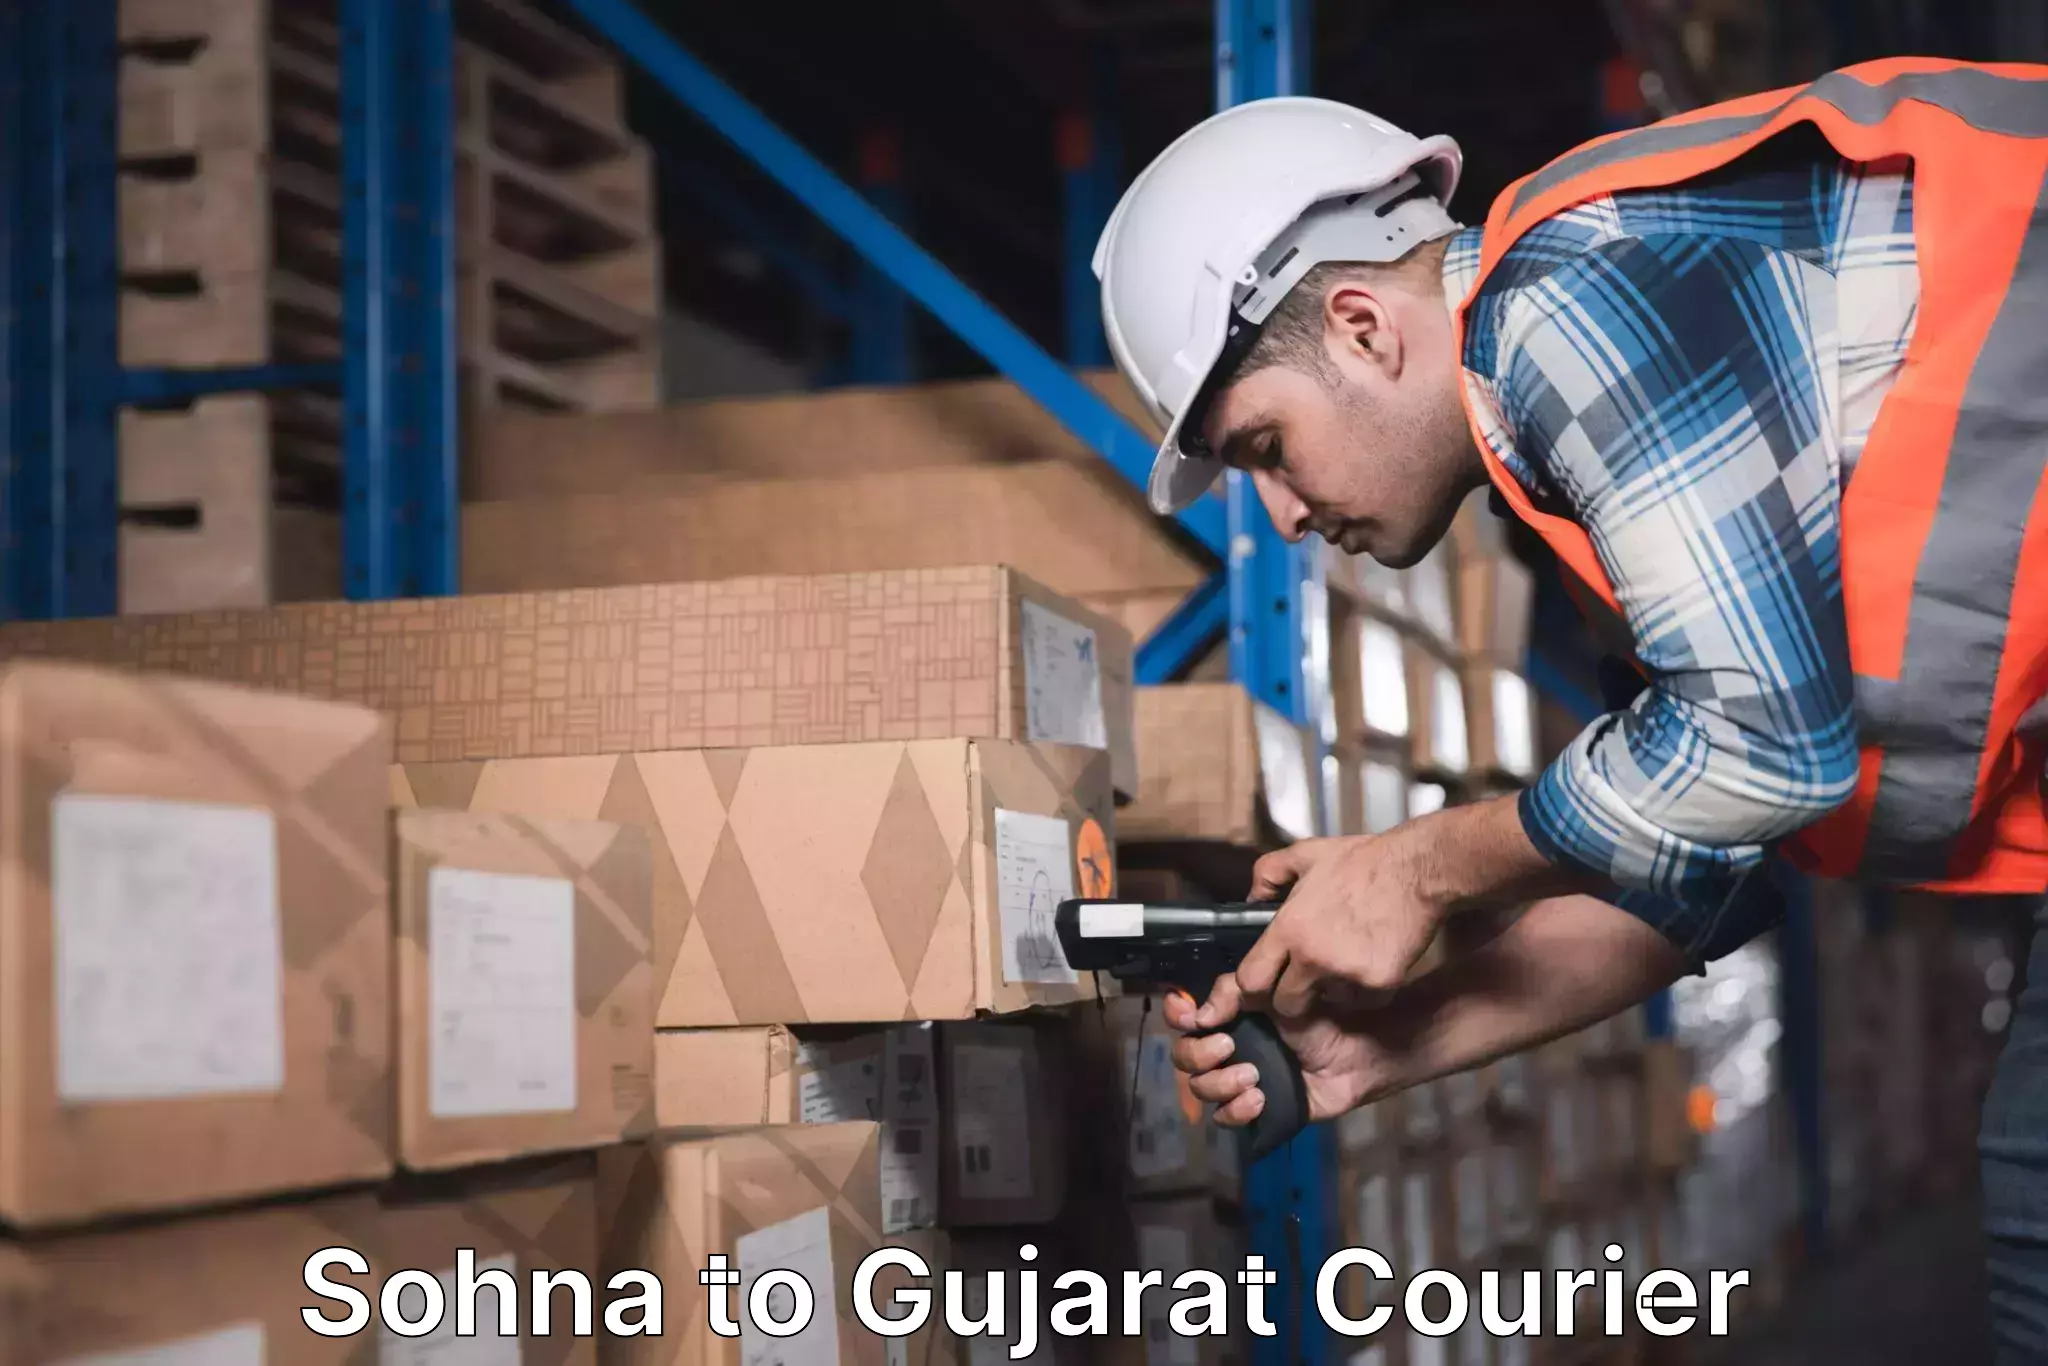 Courier app Sohna to Ahmedabad